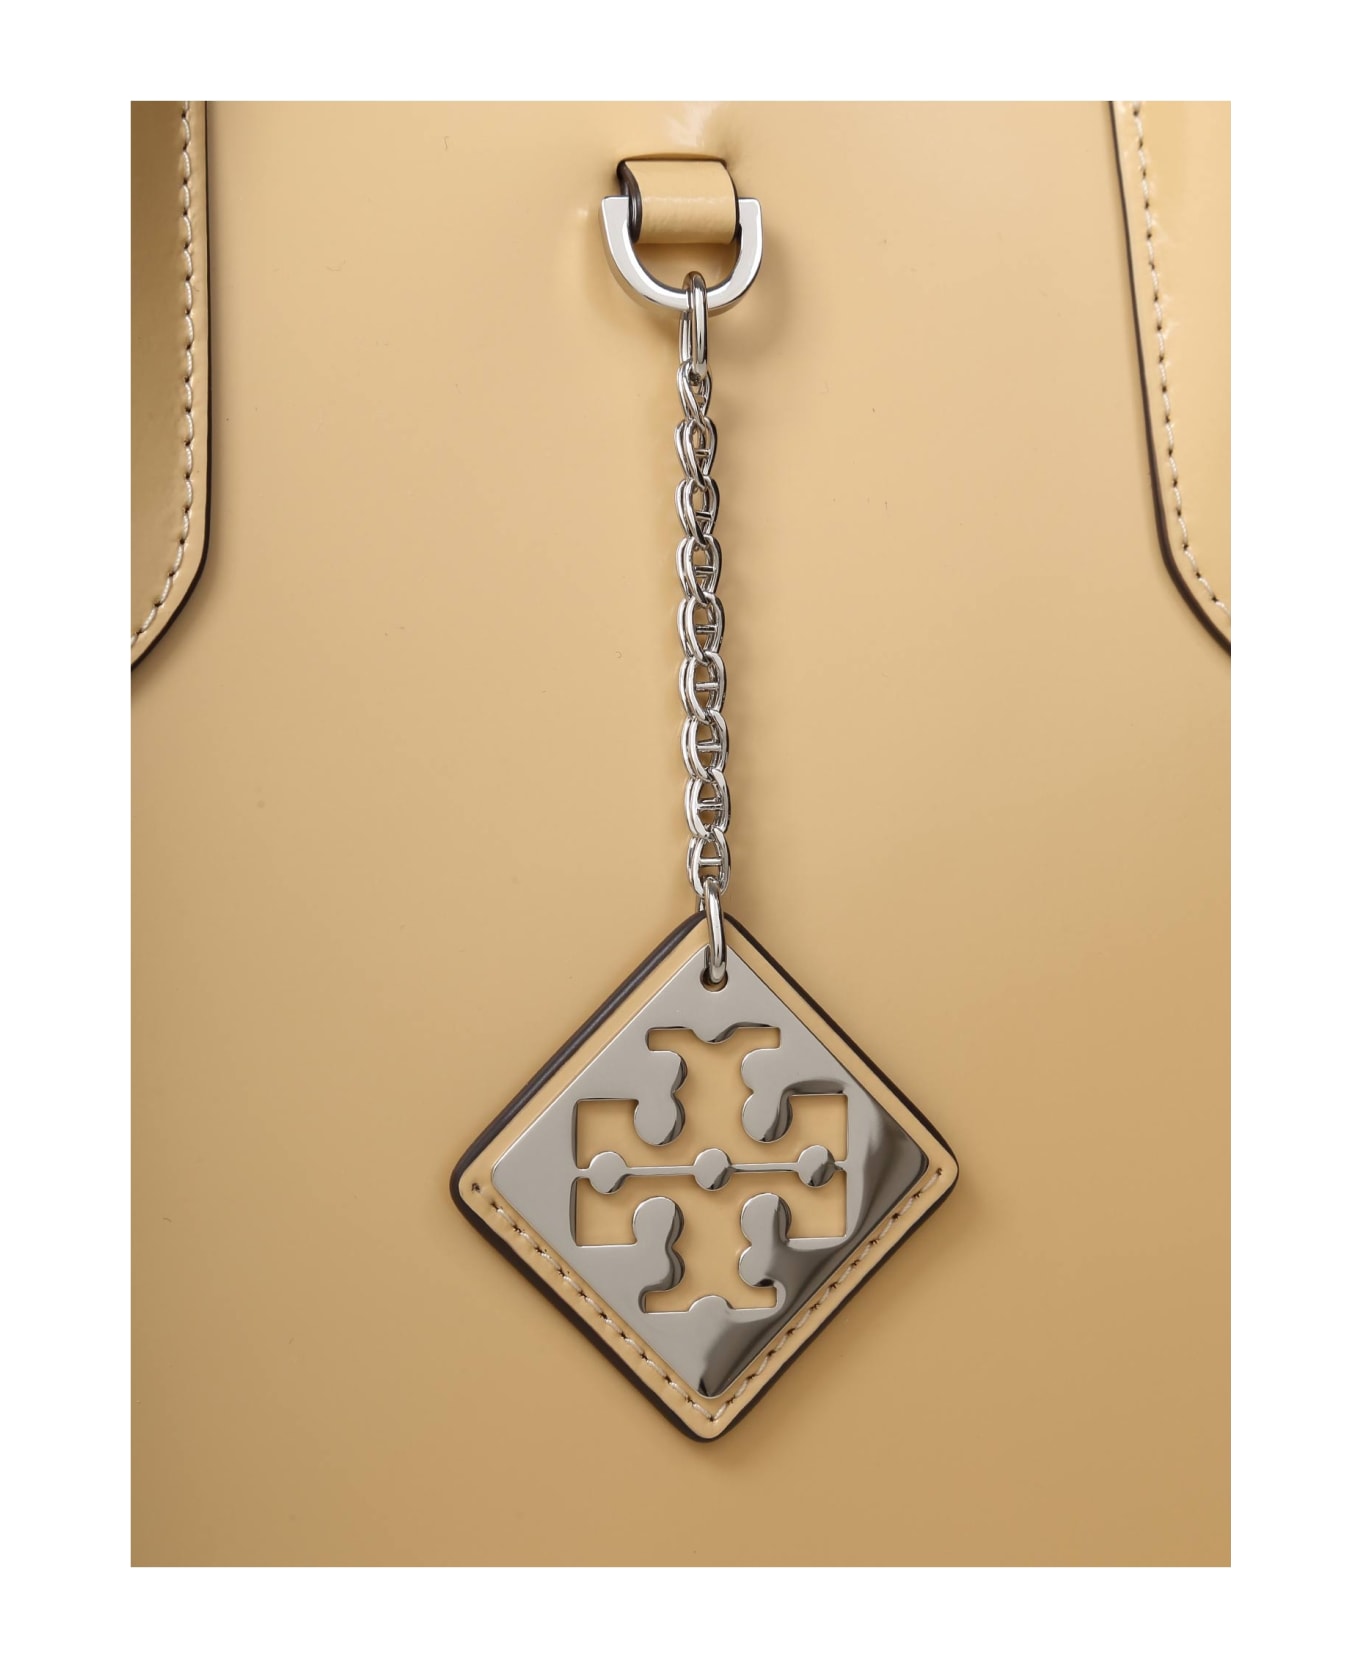 Tory Burch Swing Bag In Almond Brushed Leather - Almond